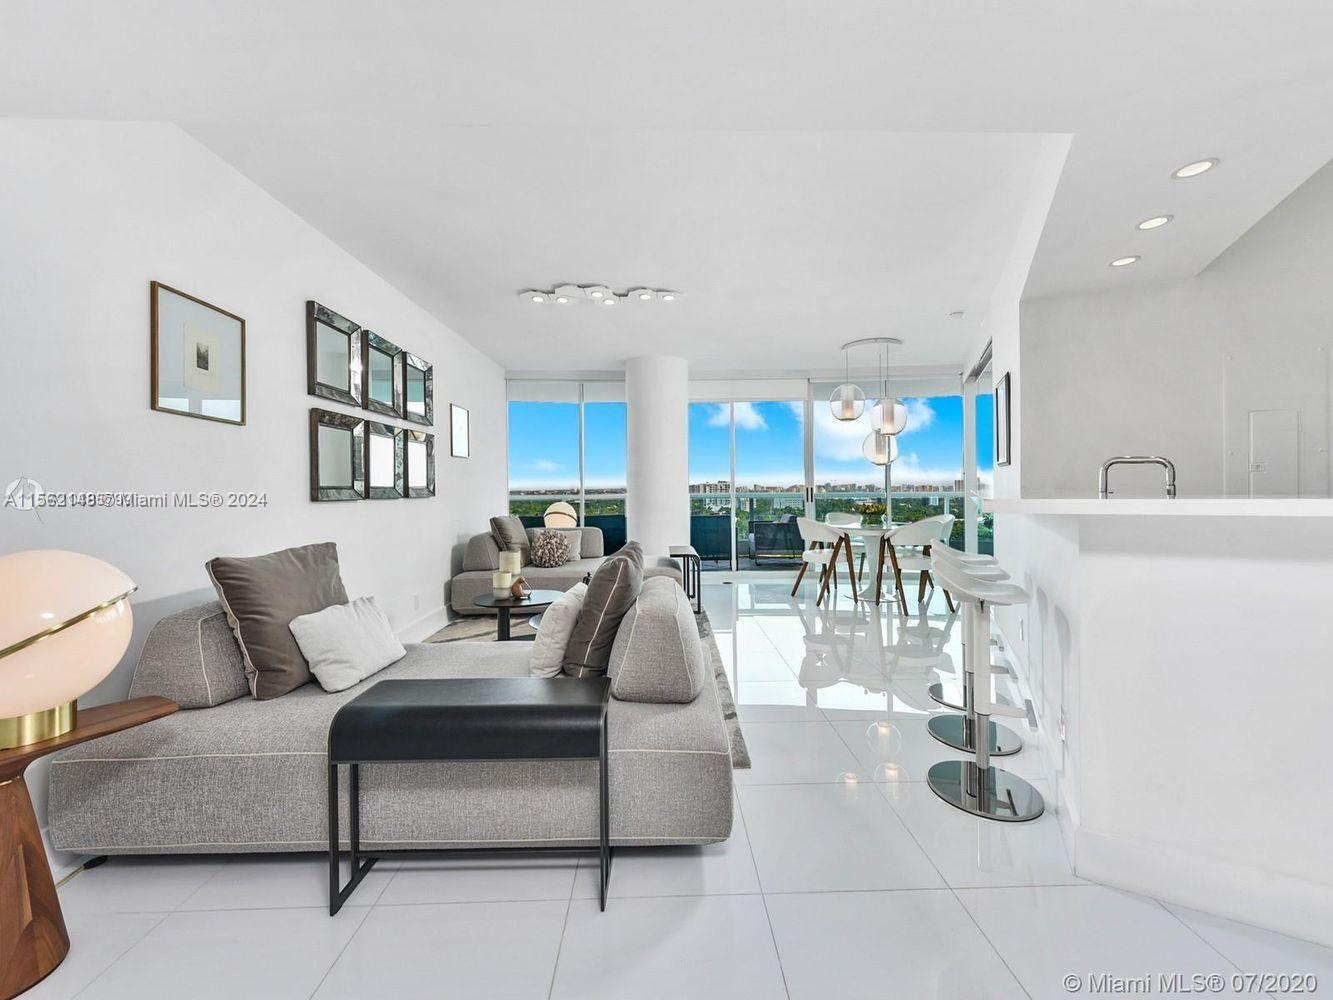 This prestigious Bristol Tower unit features unparalleled luxury; 2 bedrooms / 2-bathroom unit fully renovated modern design throughout. Built-in closets, hurricane shutters, floor to ceiling doors open to a wraparound balcony with panoramic skyline and sunset views from every room. Unique waterfront location walking distance to Mary Brickell Village and Brickell Financial Center.